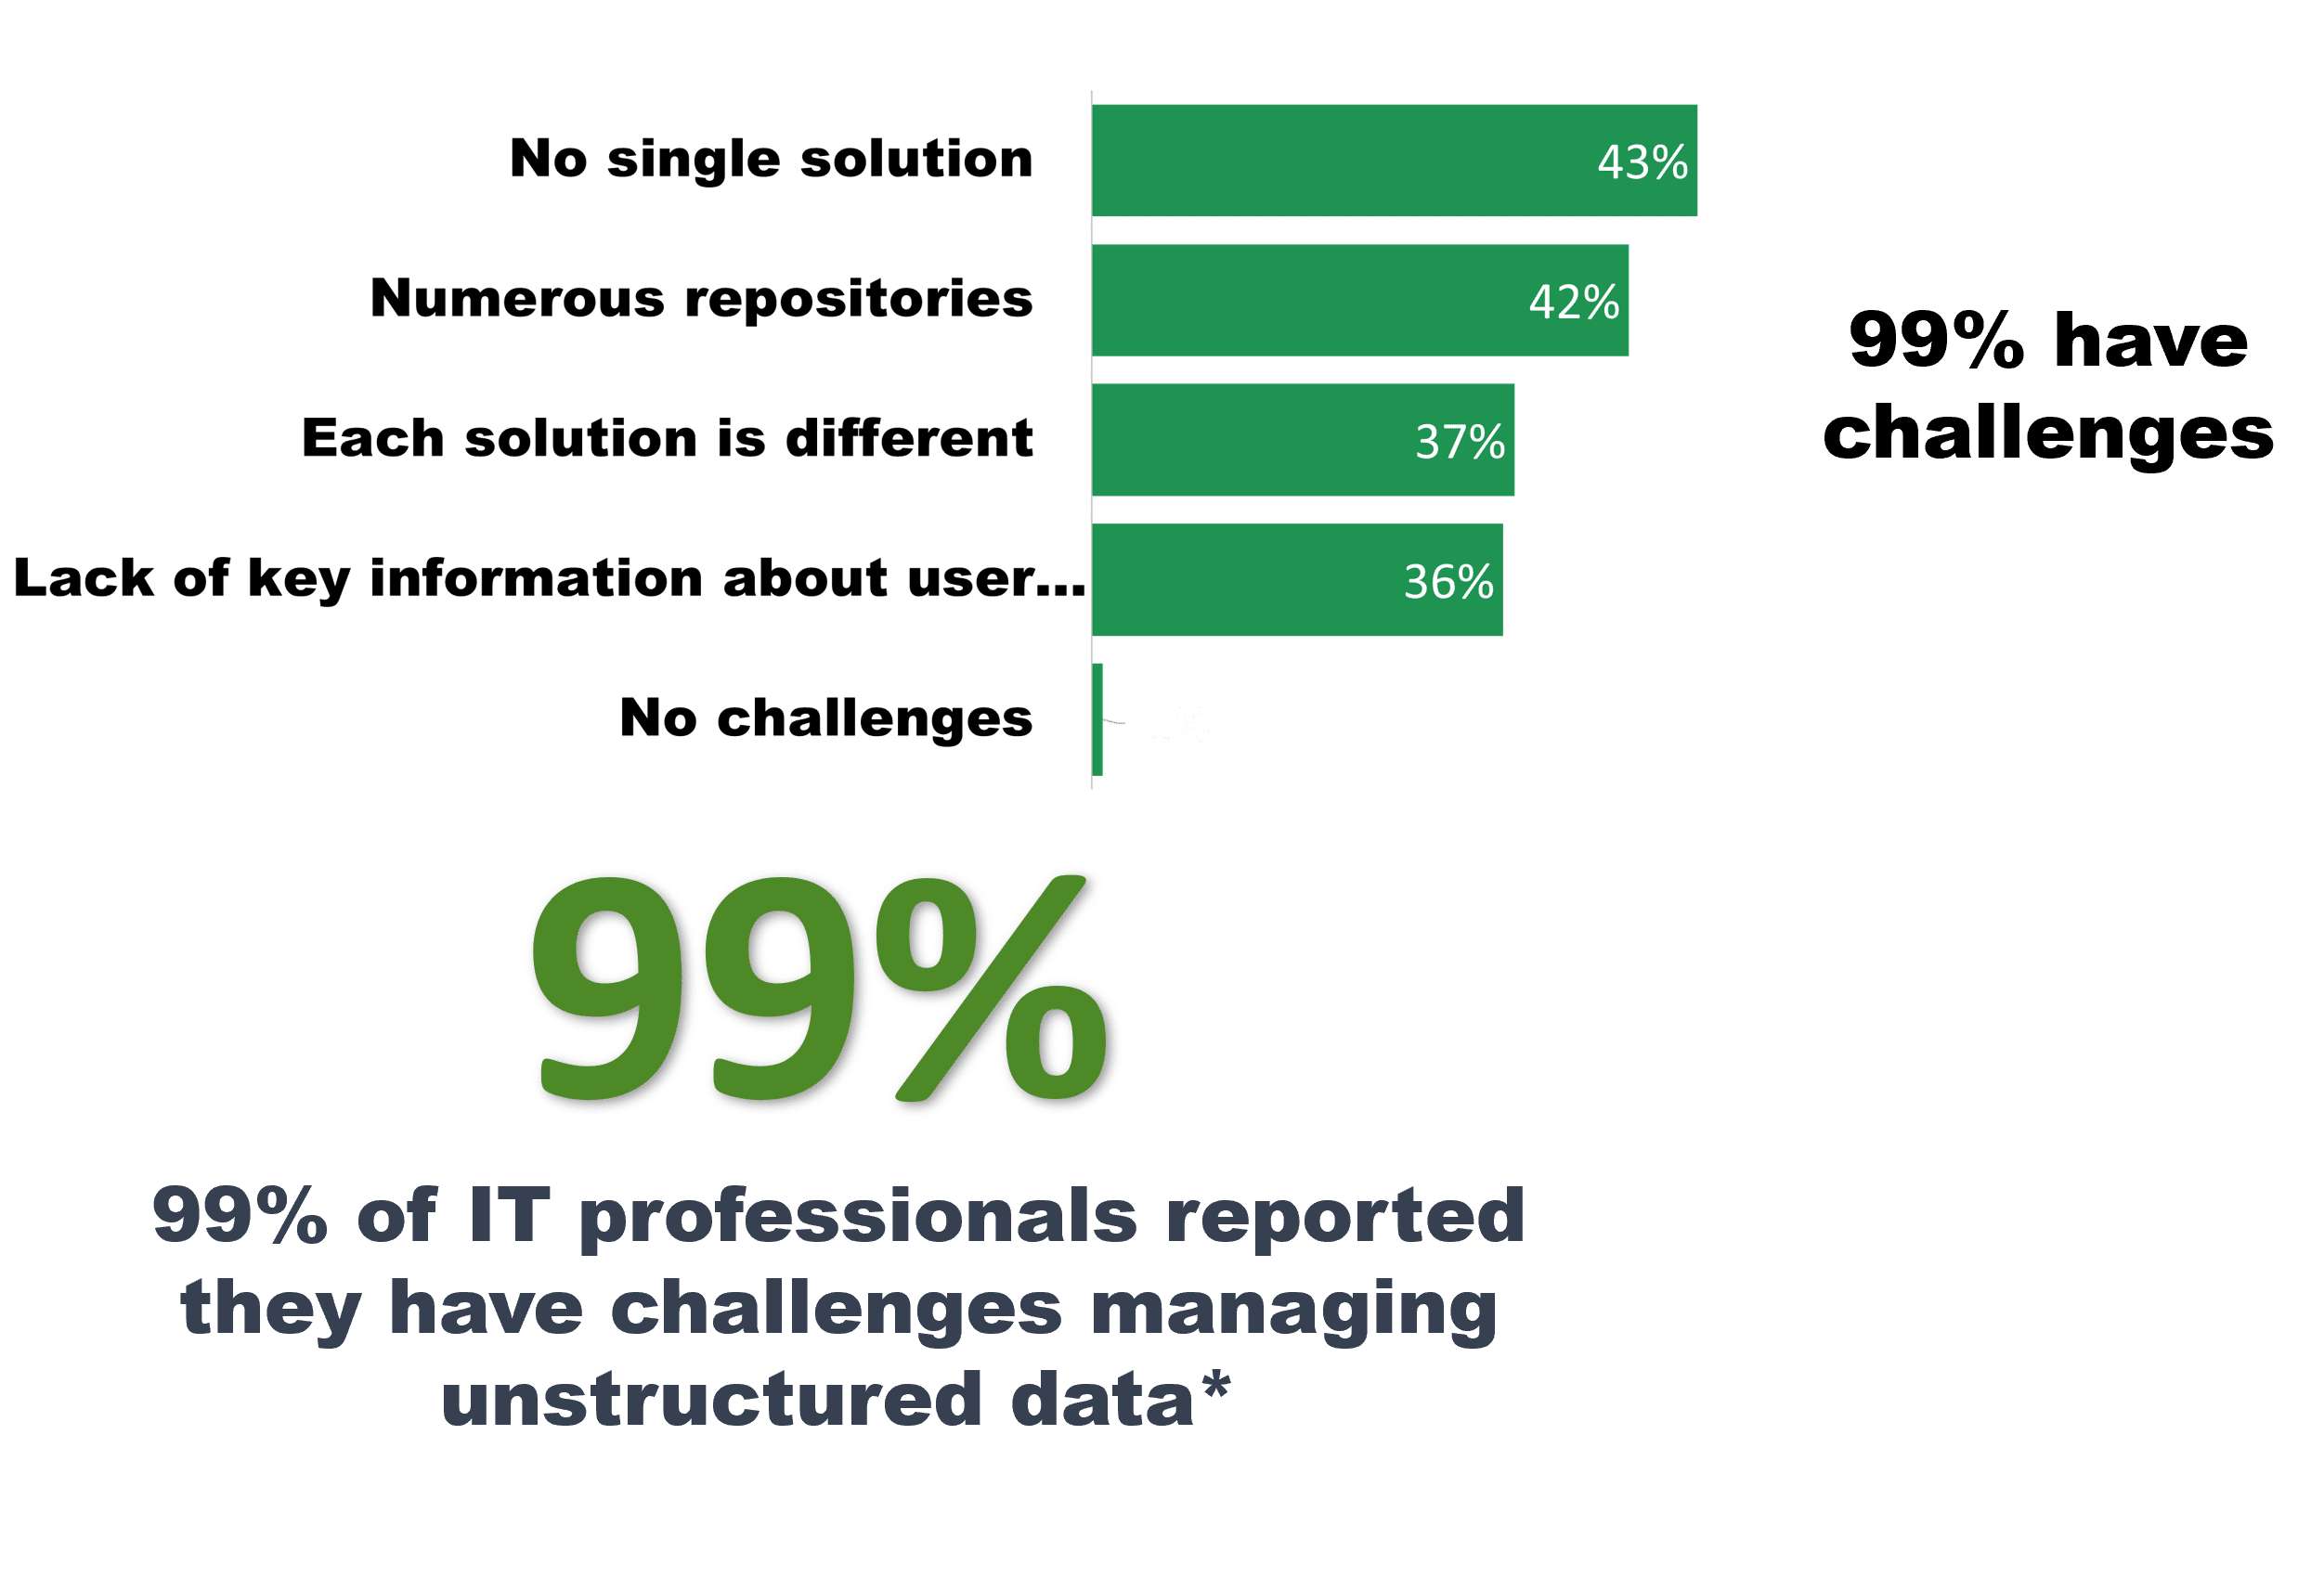 Unstructured data challenges for IT